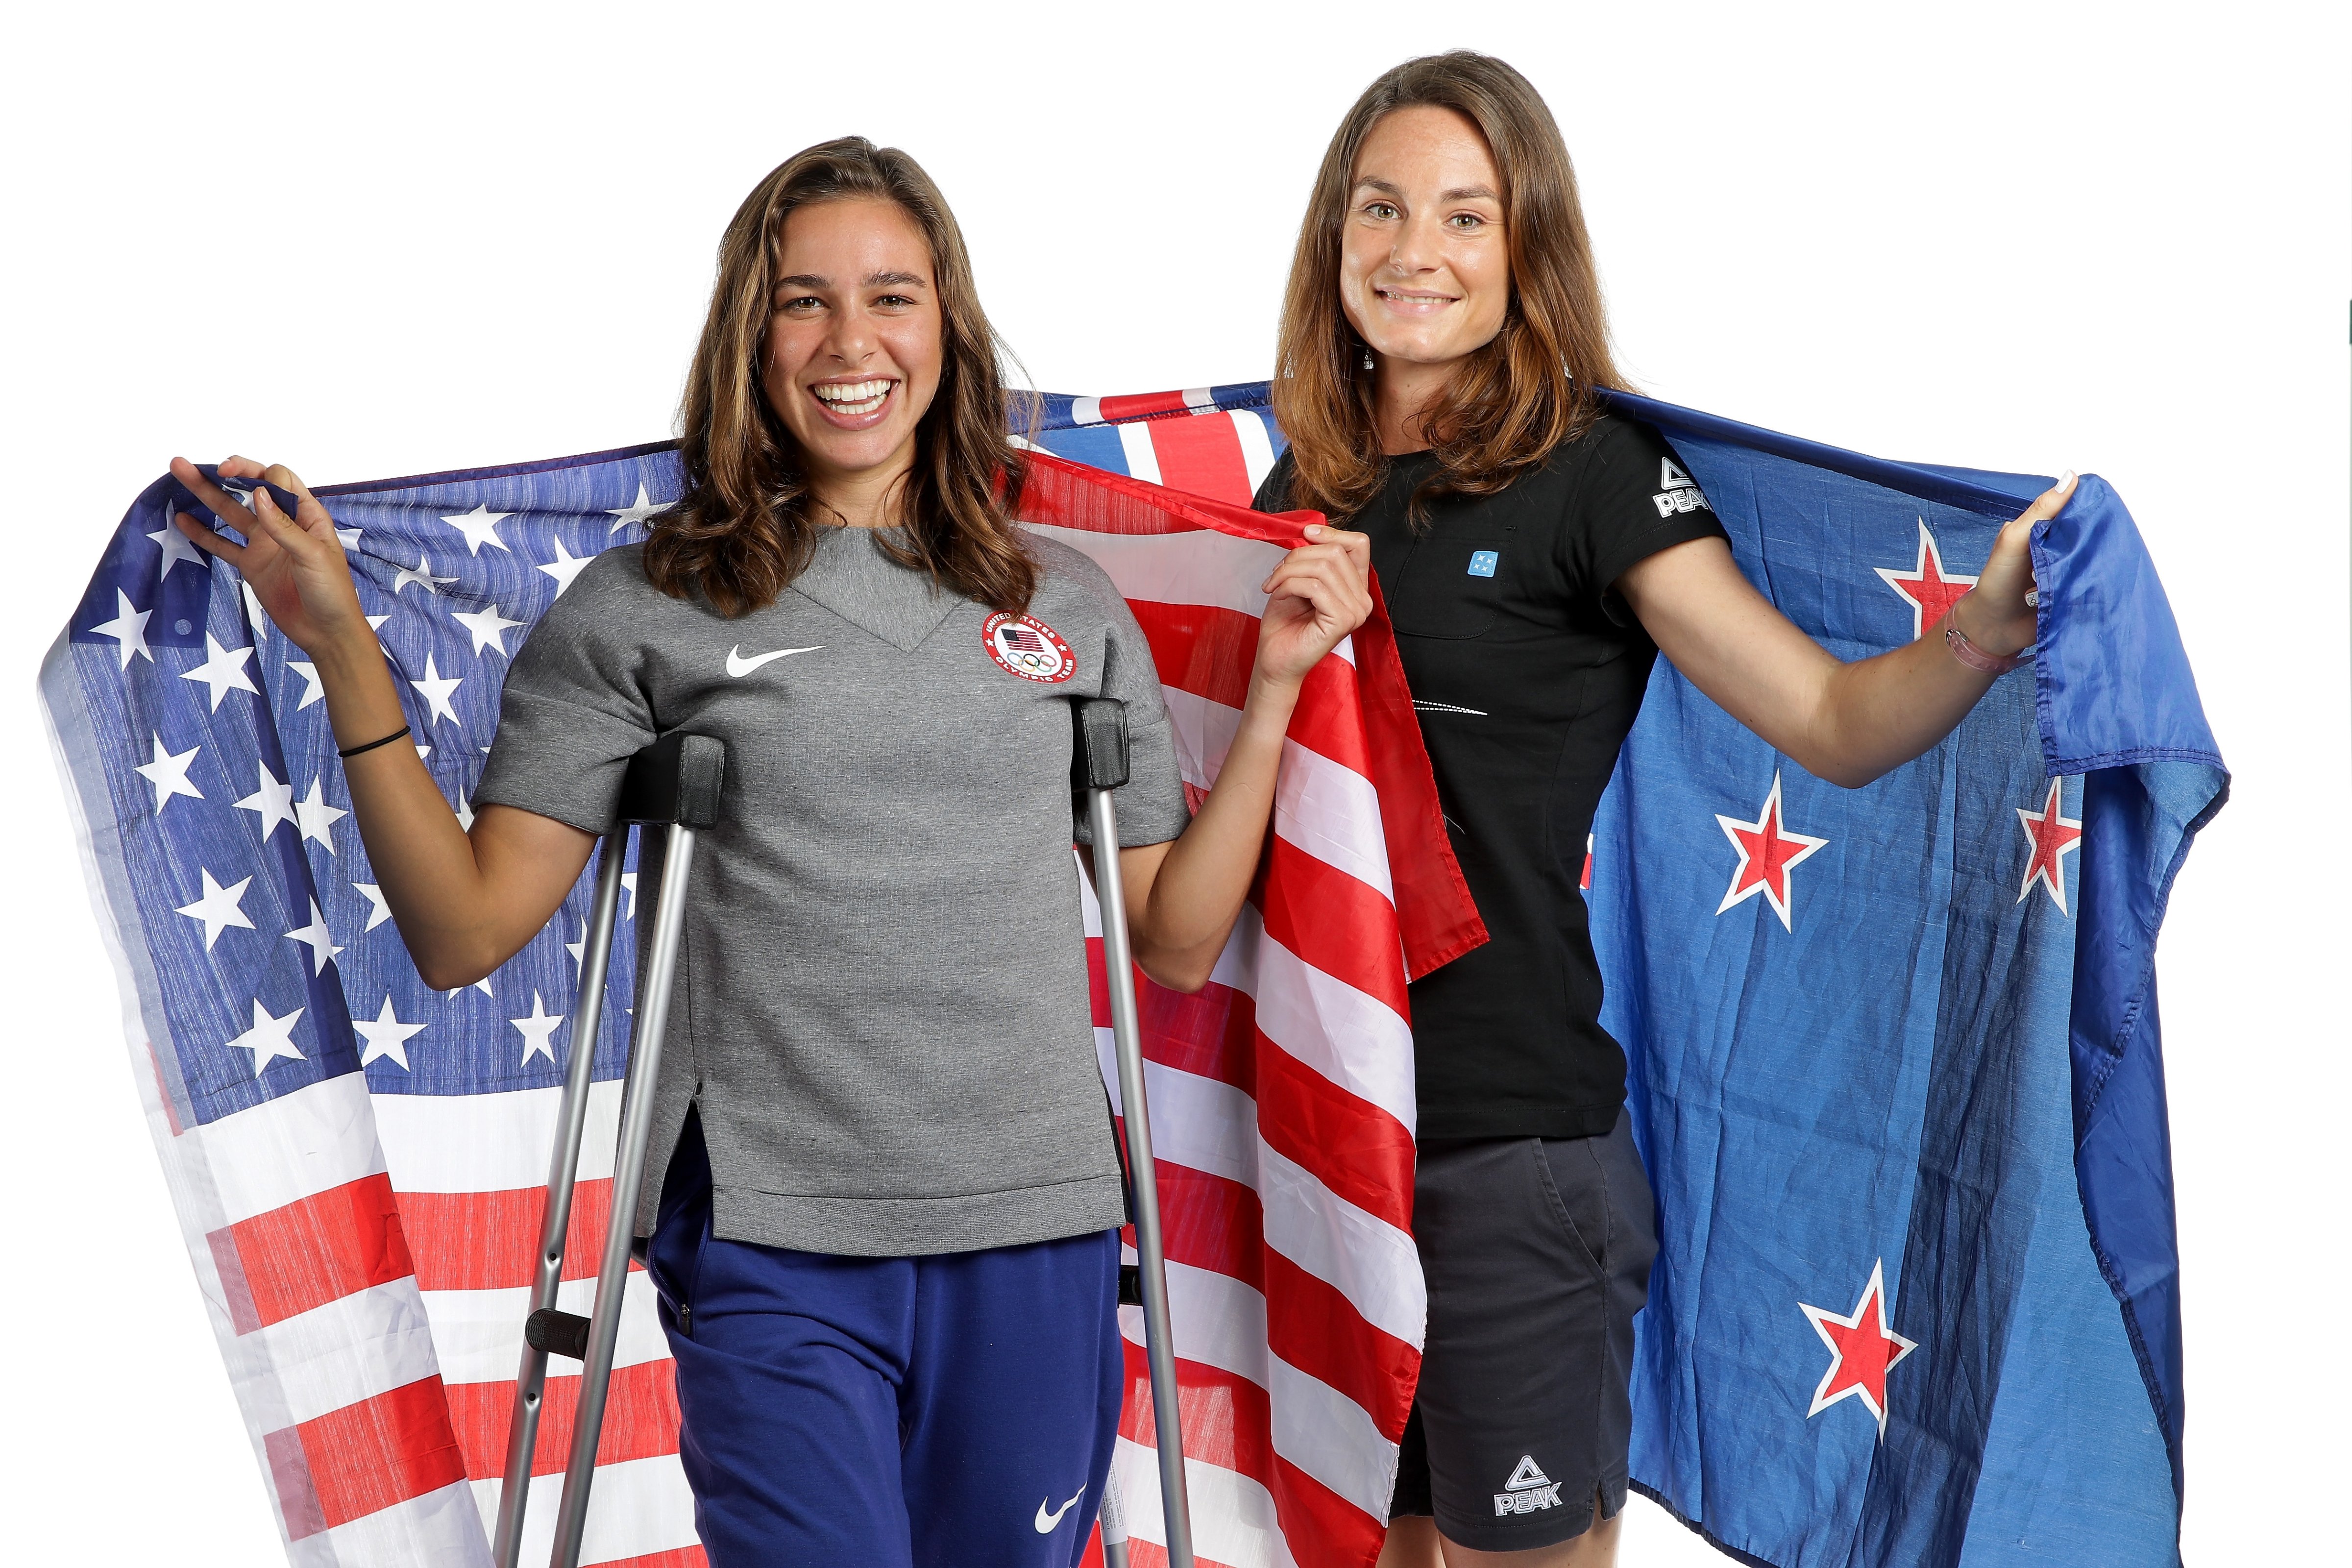 RIO DE JANEIRO, BRAZIL - AUGUST 17:  New Zealand distance runner, Nikki Hamblin and American runner, Abbey D'Agostino pose for a portrait on August 17, 2016 in Rio de Janeiro, Brazil. Hamblin and D'Agostino came last in their 5000m heat on Tuesday after they collided and fell midway through their race. The pair have been commended for their sportsmanship after they helped each other up to finish the race.  (Photo by Chris Graythen/Getty Images) (Chris Graythen—Getty Images)